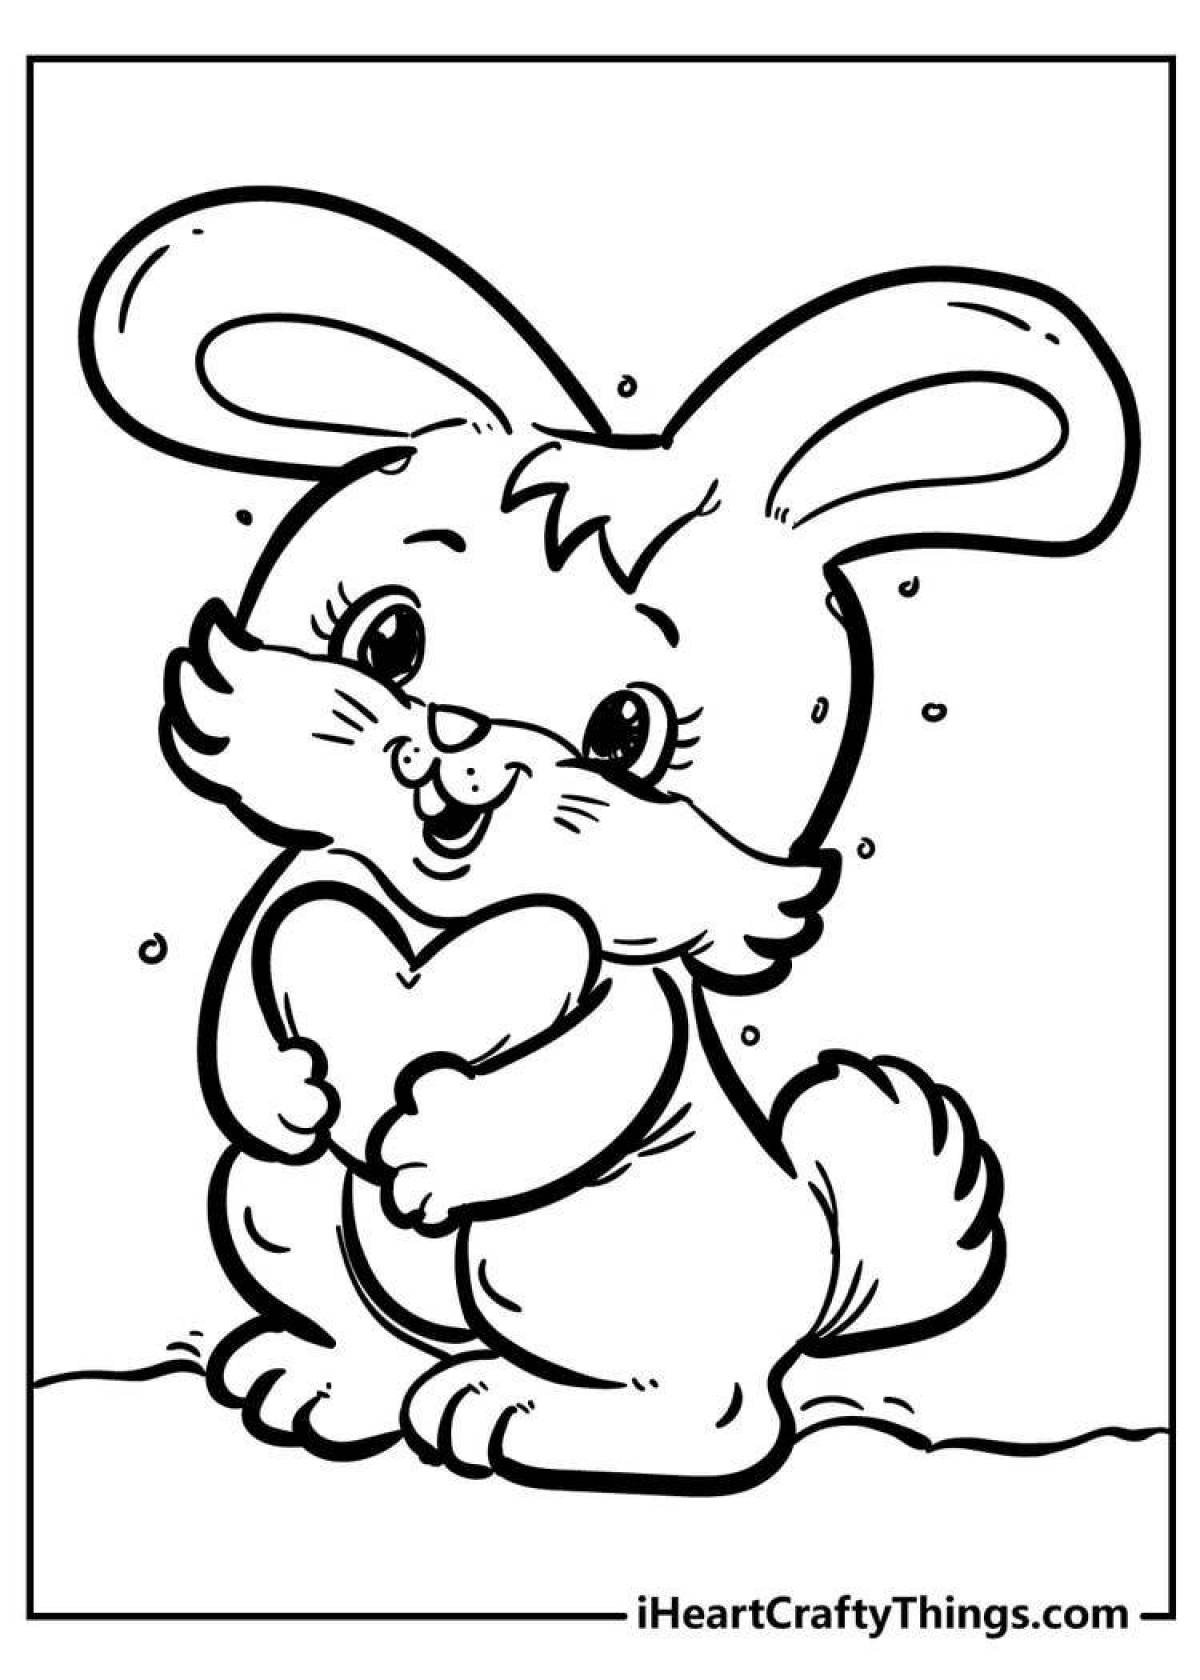 Coloring book shining rabbit and cat